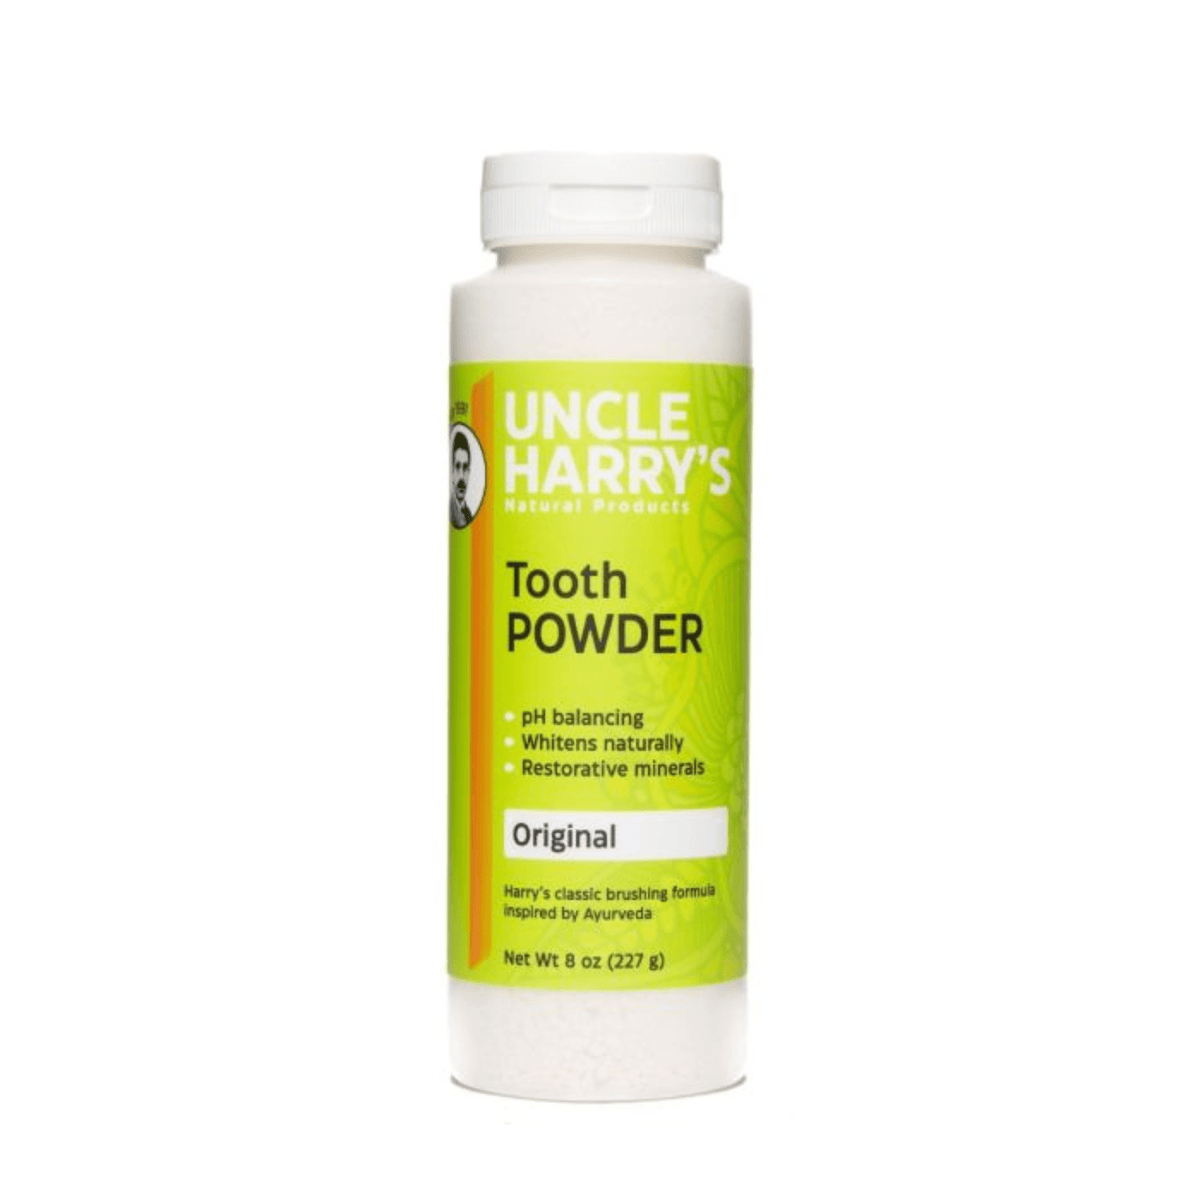 Primary Image of All-Natural Tooth Powder